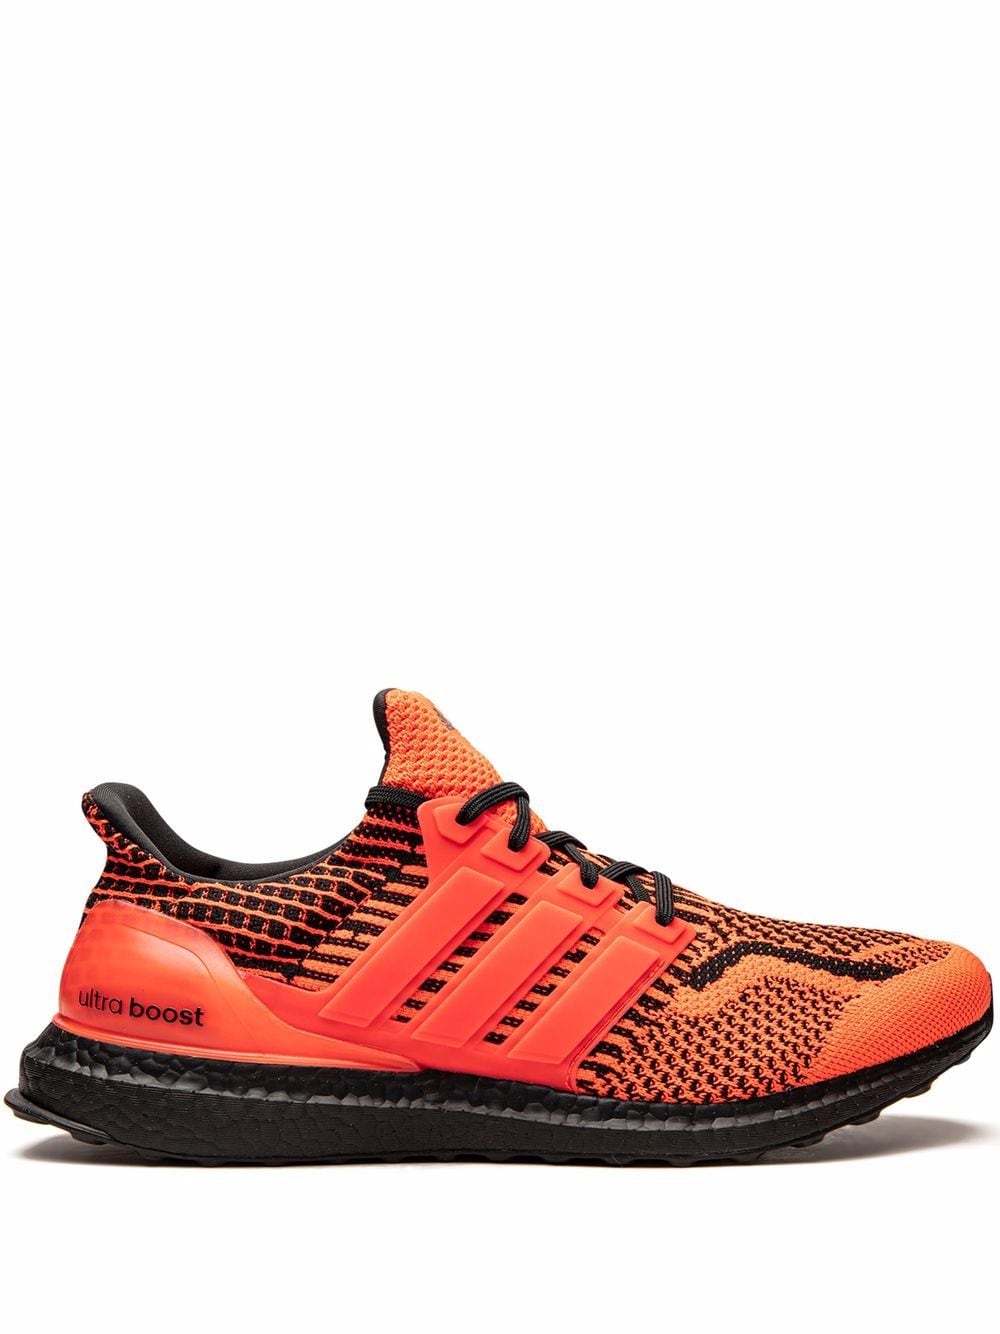 adidas Ultraboost 5.0 DNA "Solar Red/Core Black" sneakers von adidas